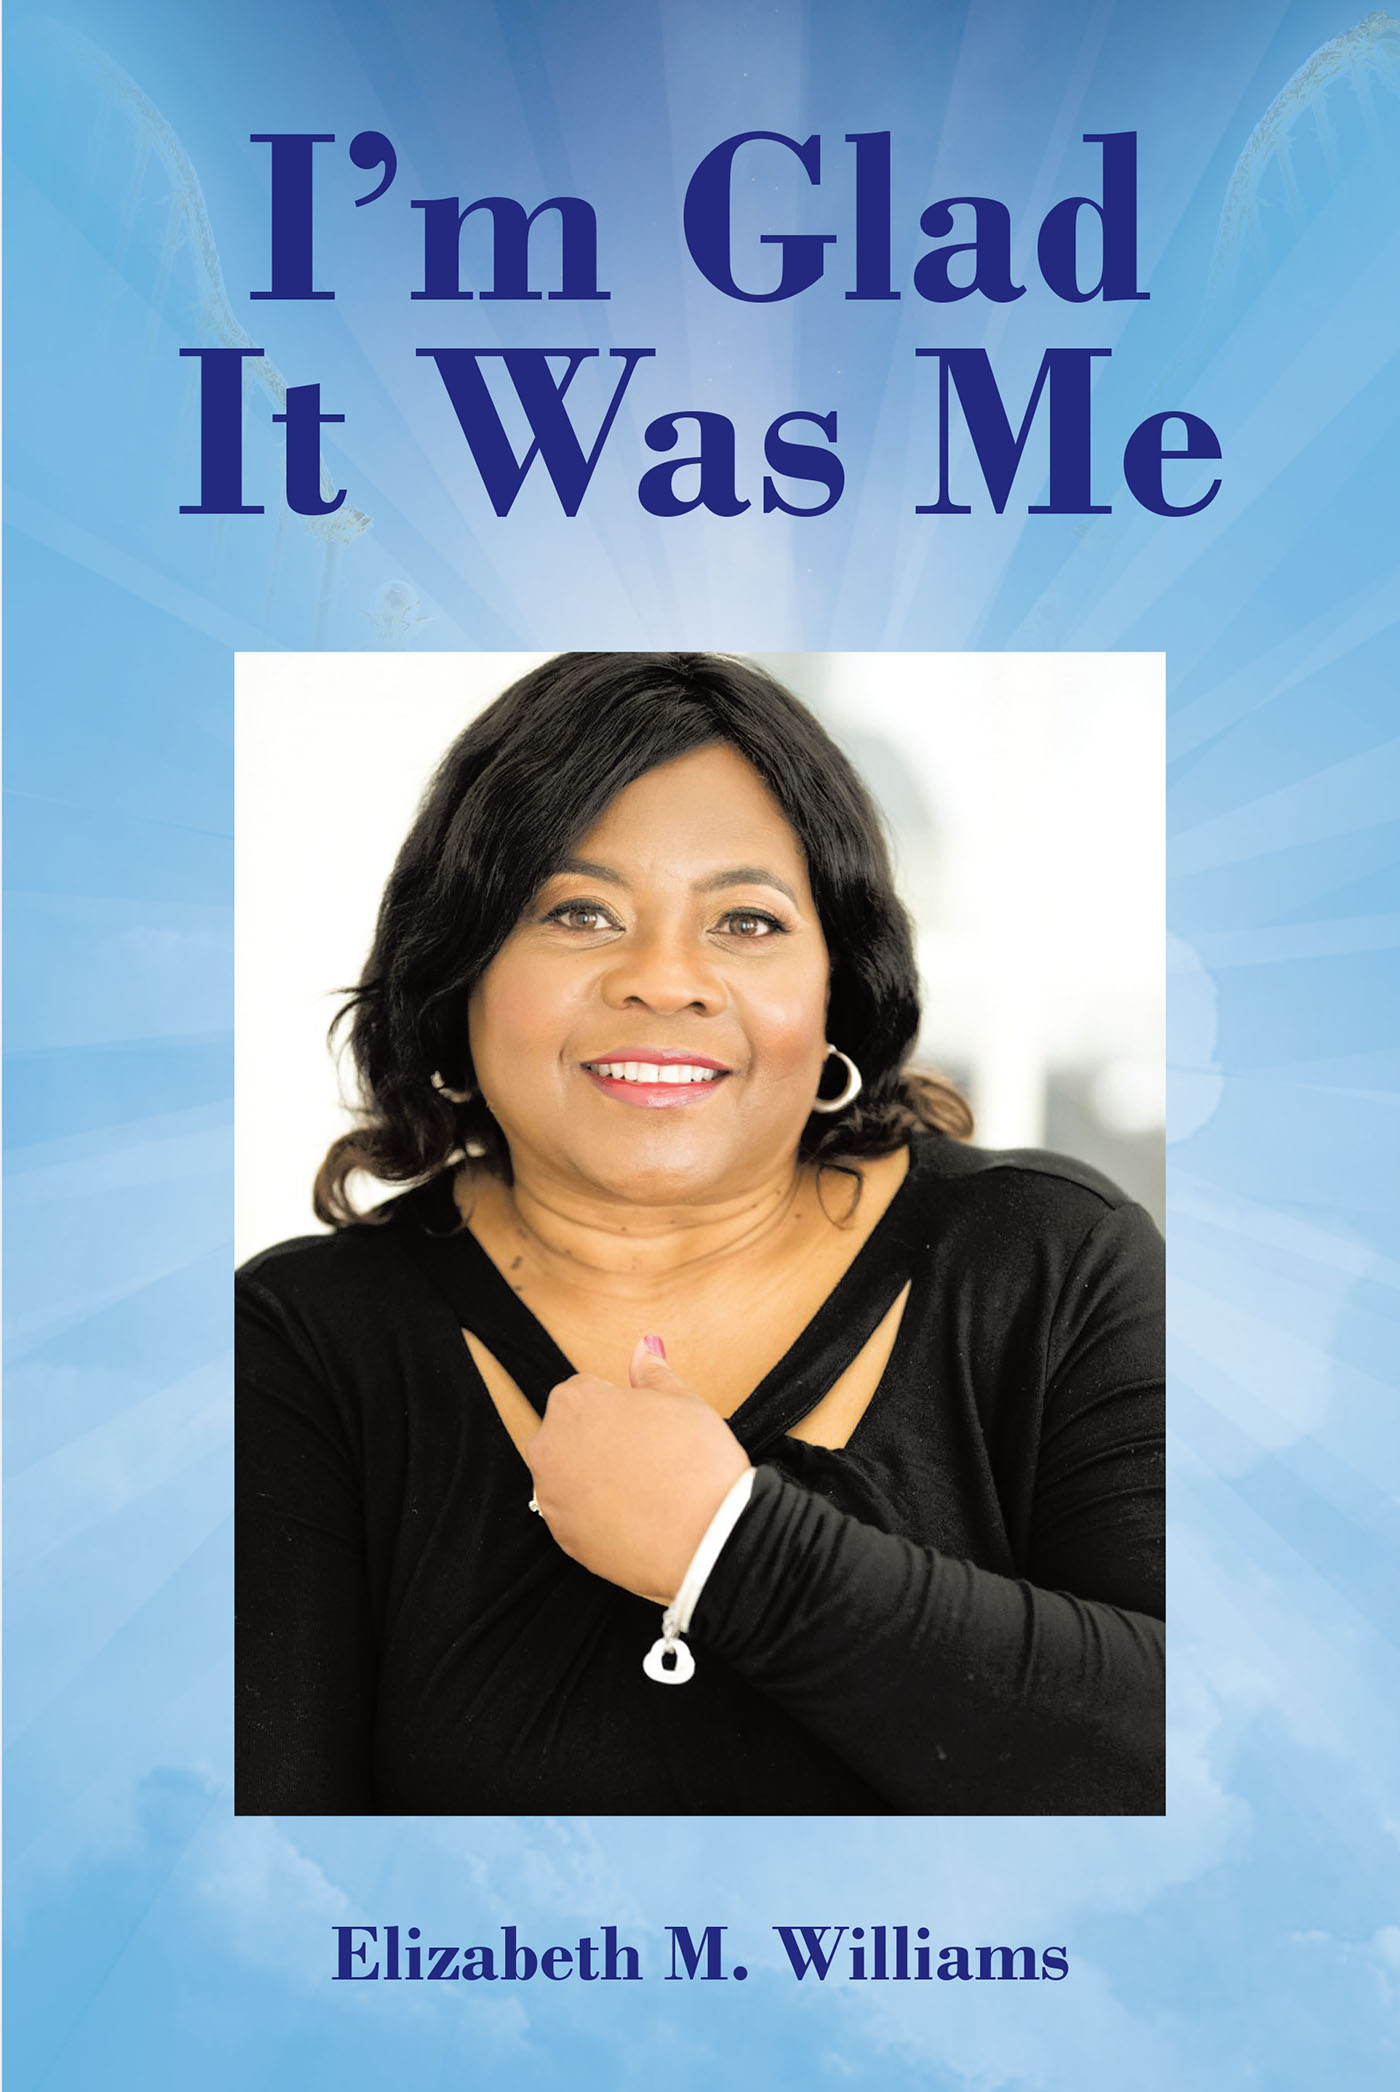 Elizabeth M. Williams’s Newly Released "I’m Glad It Was Me" is an Honest Discussion of the Impact of Watching One’s Mother Succumb to Illness